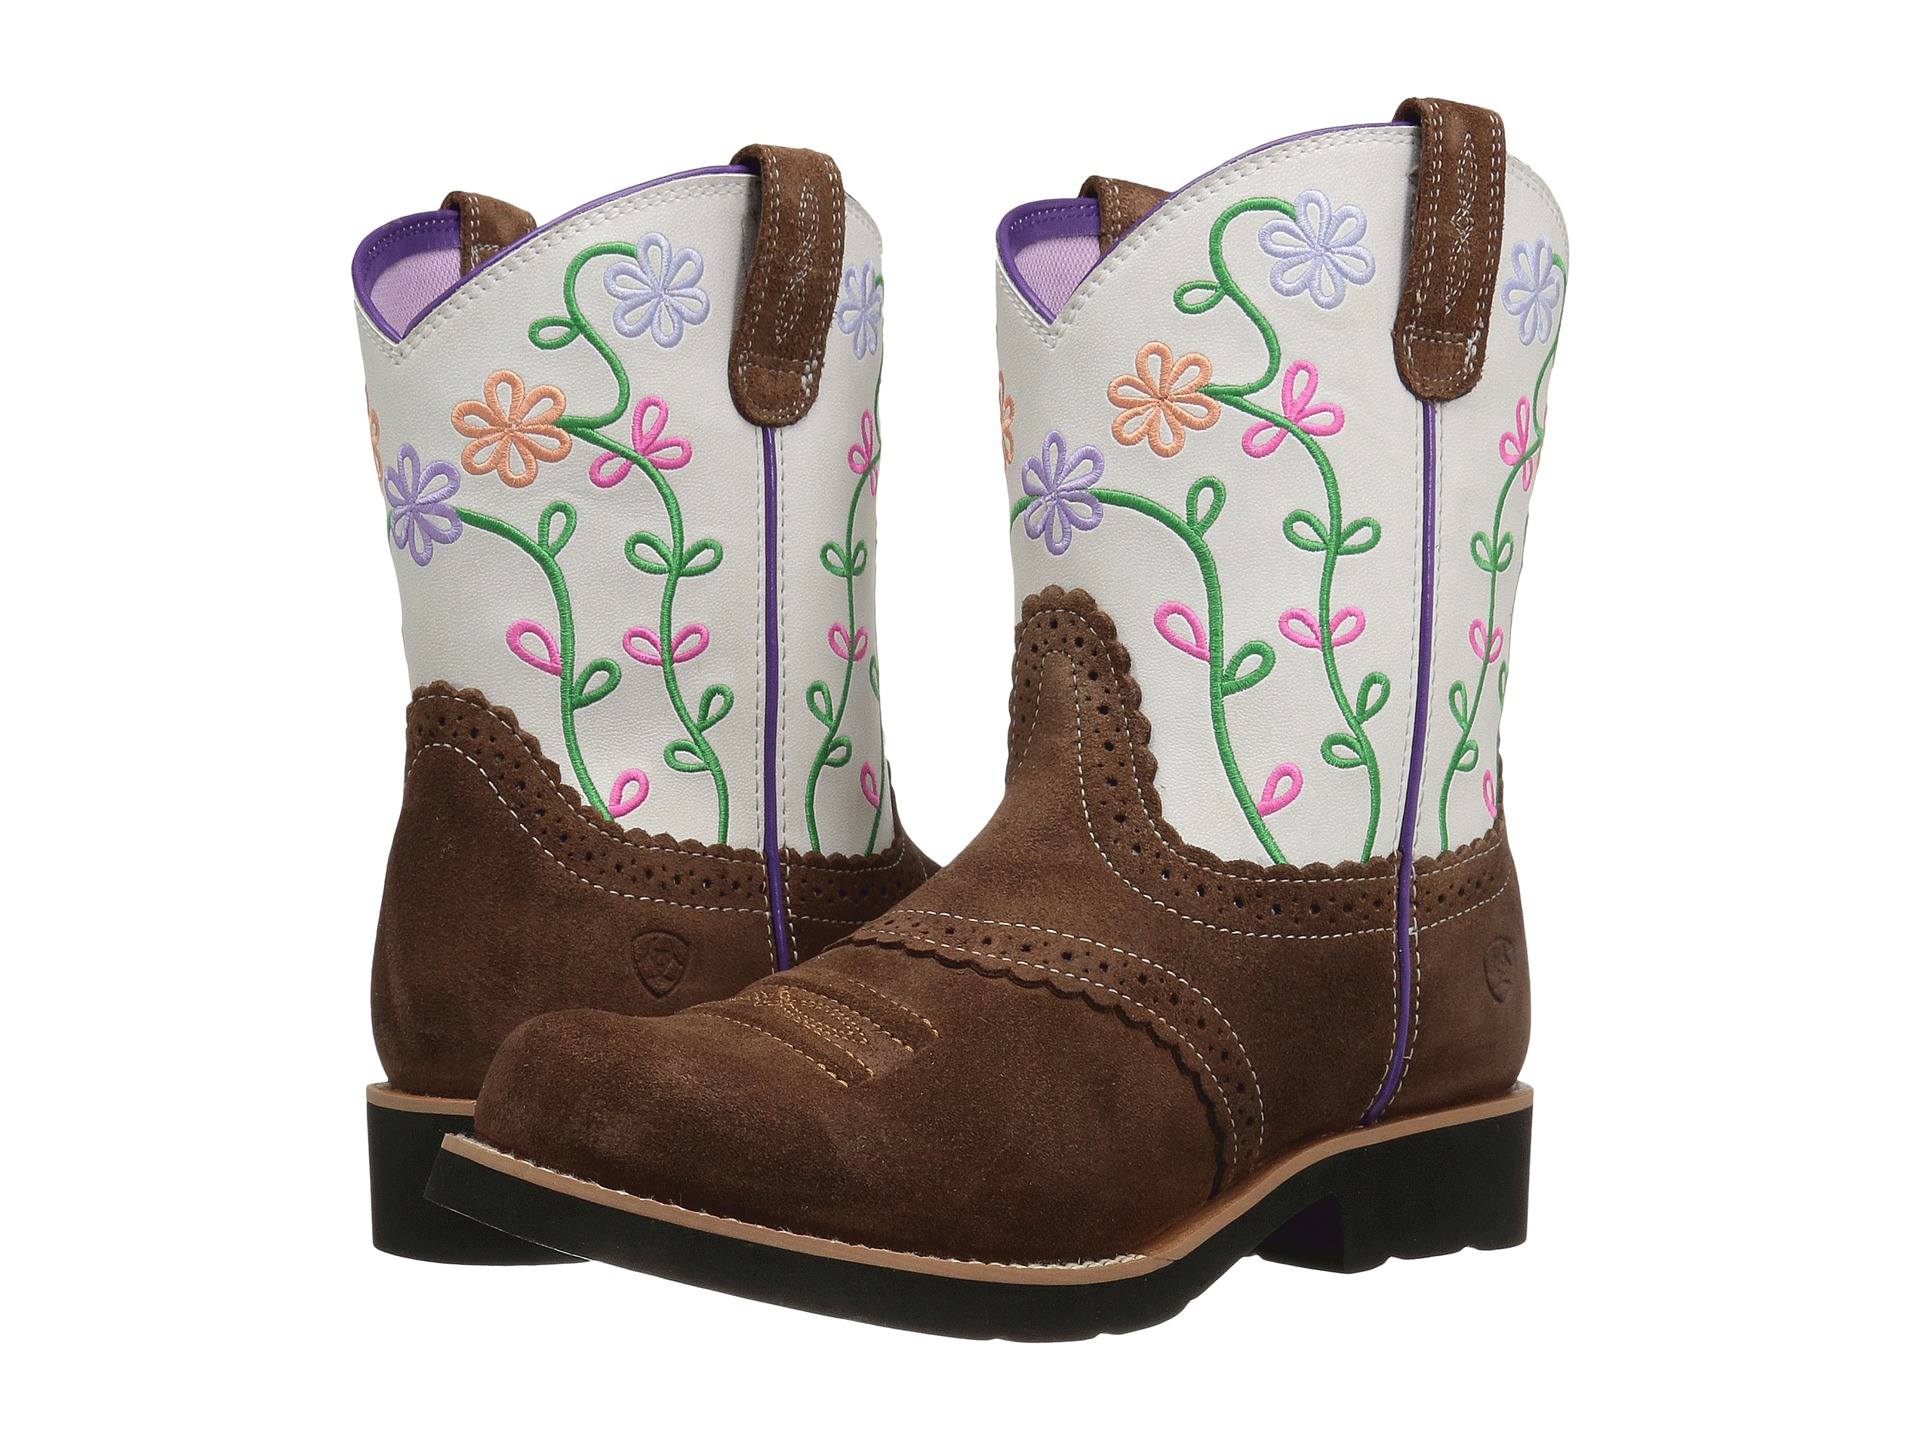 Ariat Kids, Boots, Cowboy Boots | Shipped Free at Zappos